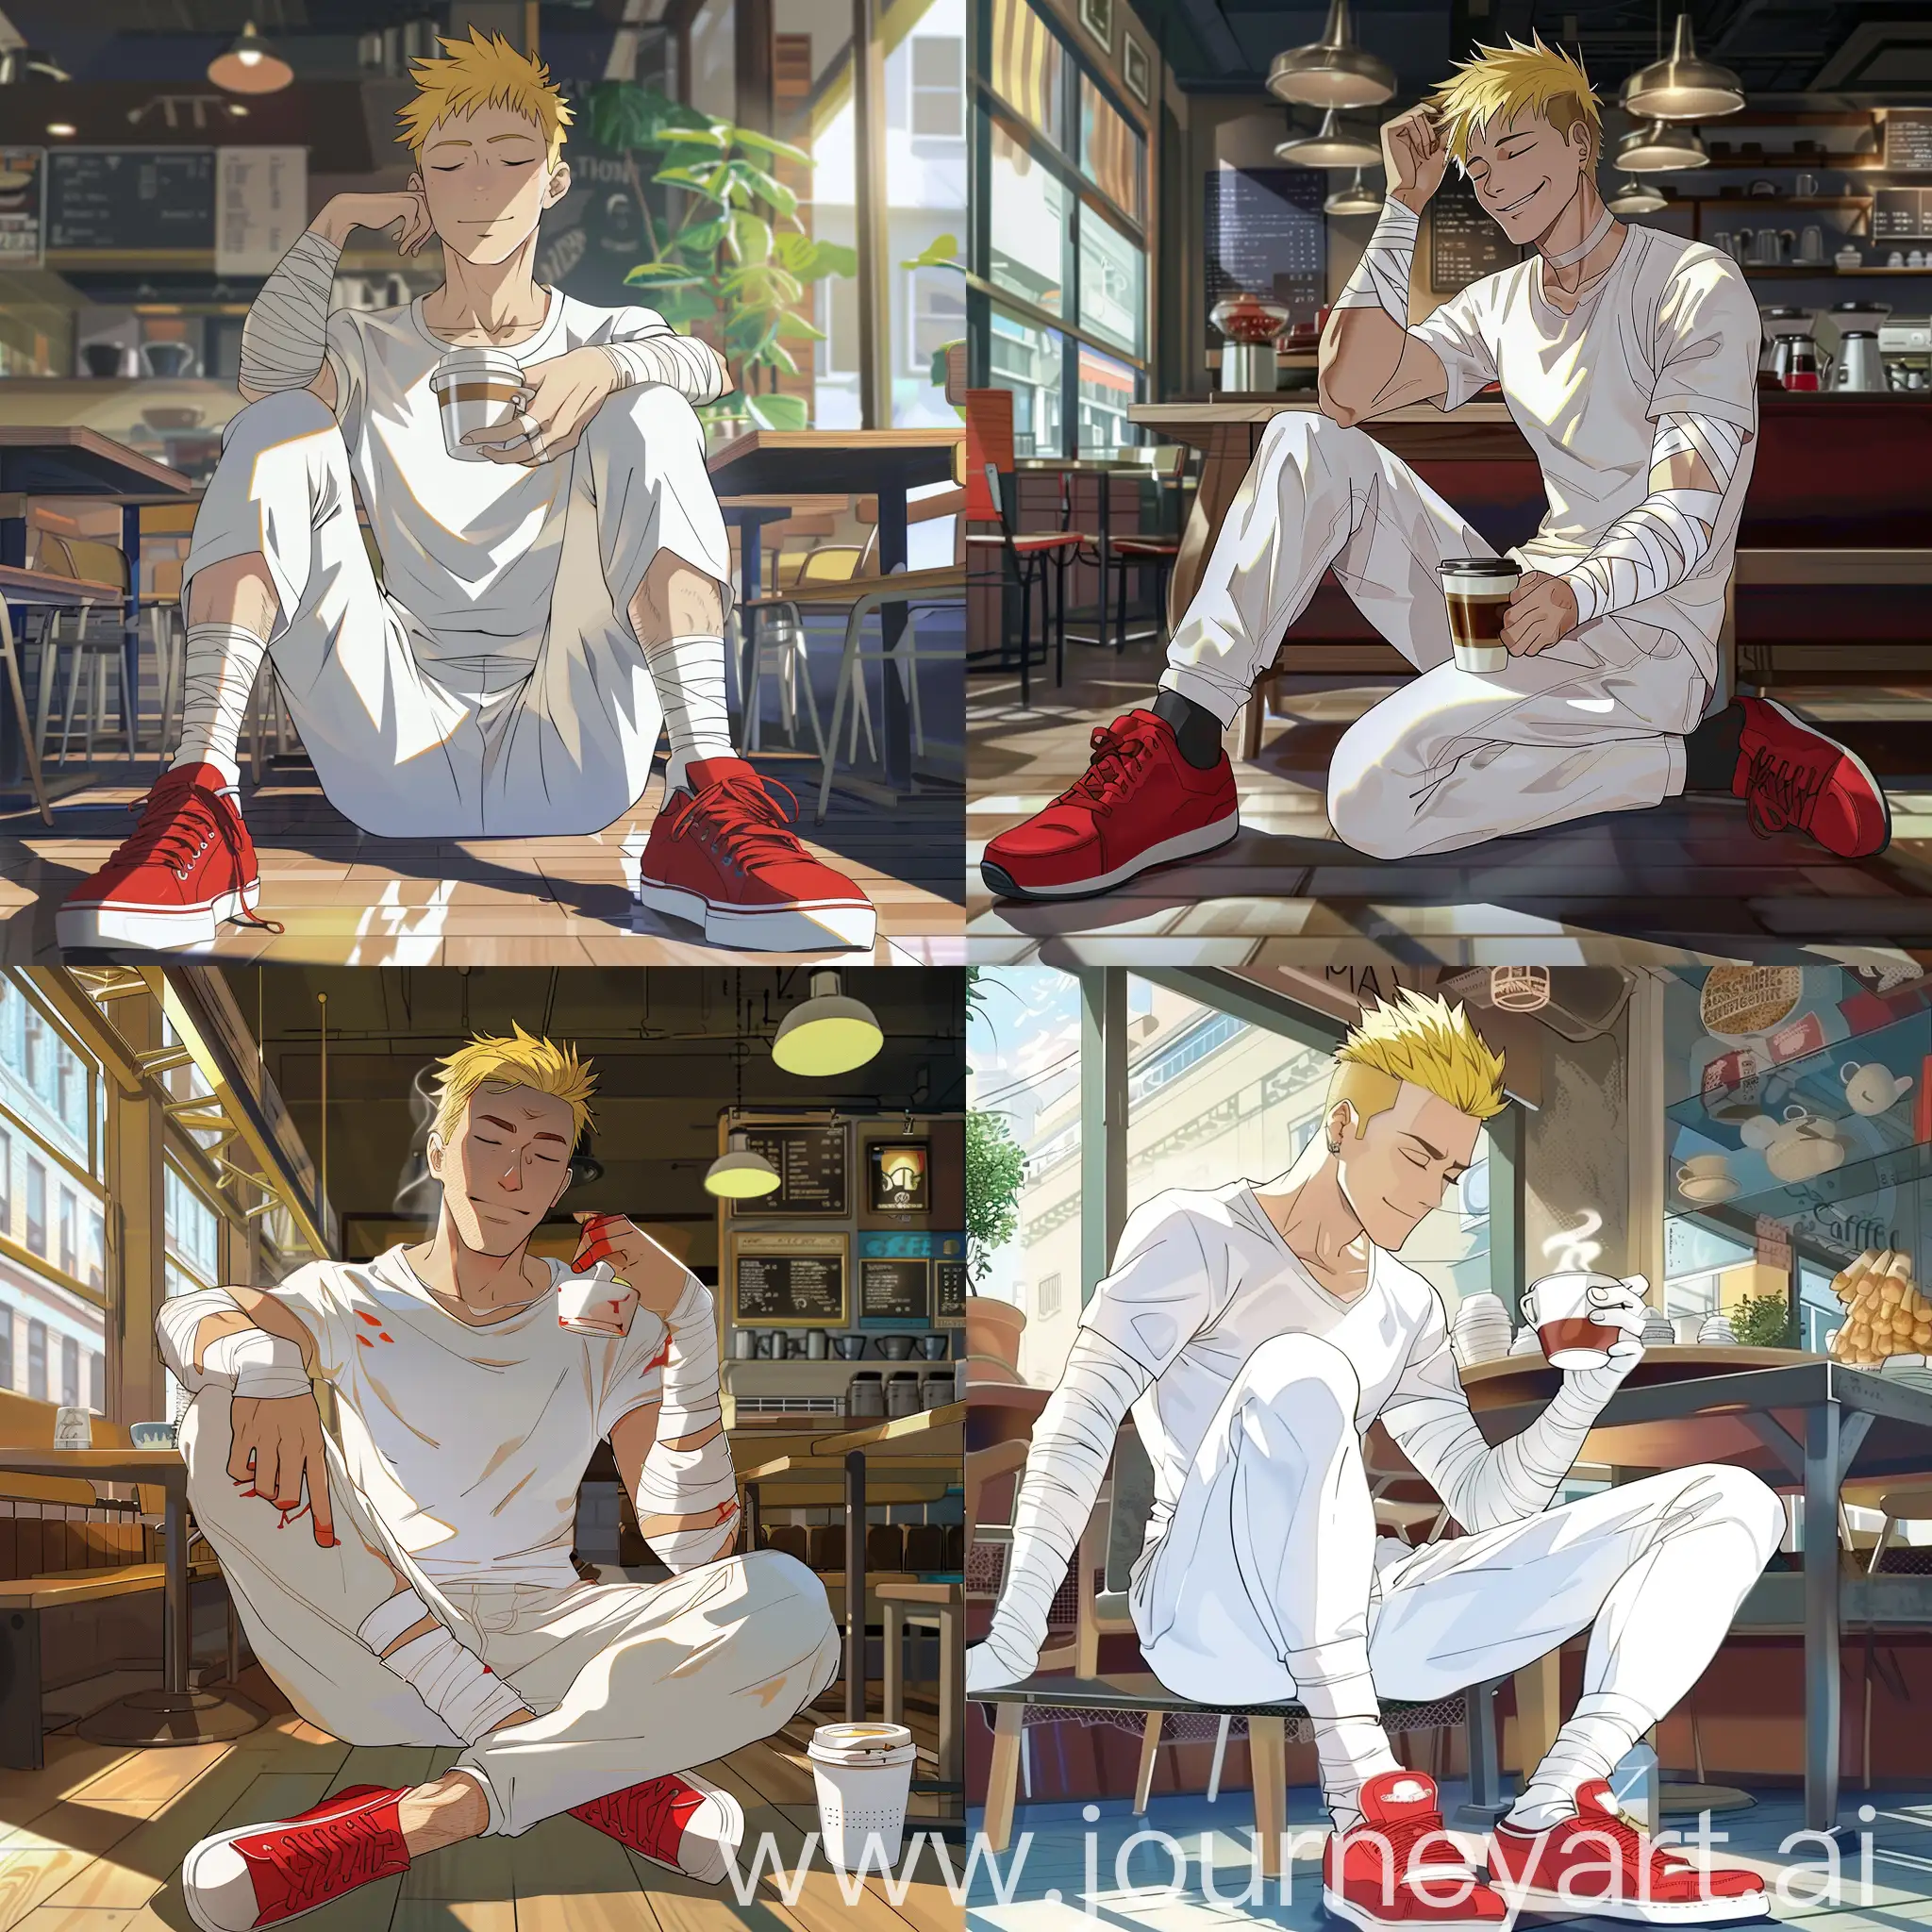 A man of mesomorphic physique tall height short yellow hair a slight smile closed eyes dressed in white bandages on the forearms white t-shirt white pants on his feet red sneakers sitting foot to foot in coffee house with a cup of coffee in his right hand, anime style